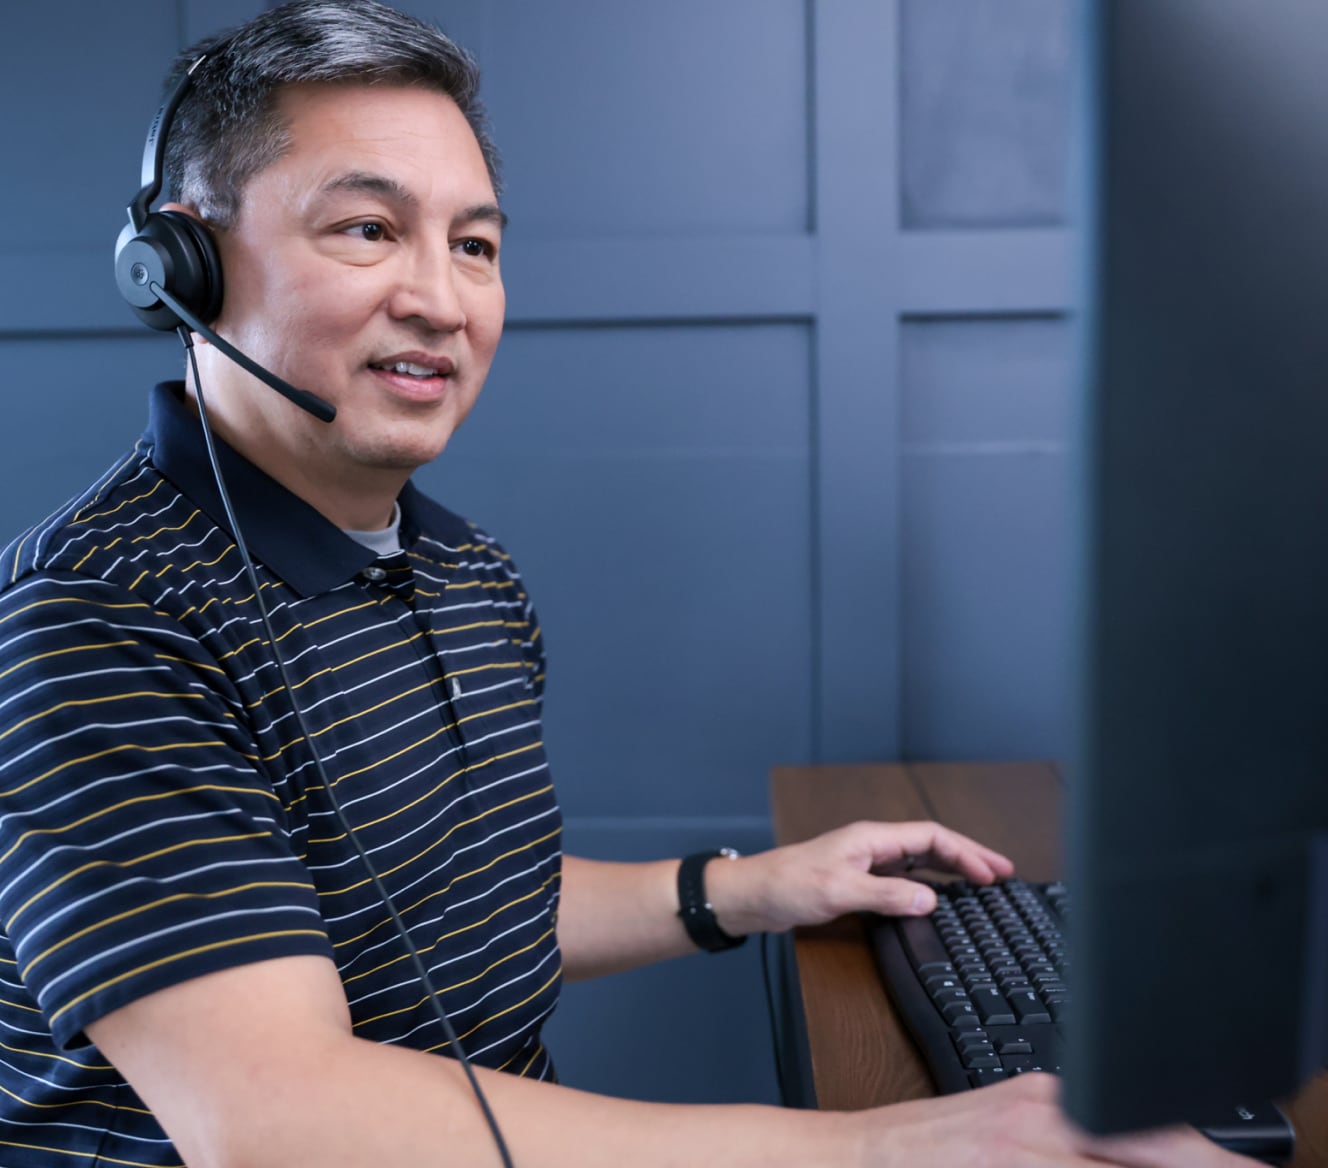 ADT customer service rep typing on his computer and troubleshooting with a customer on his headset 